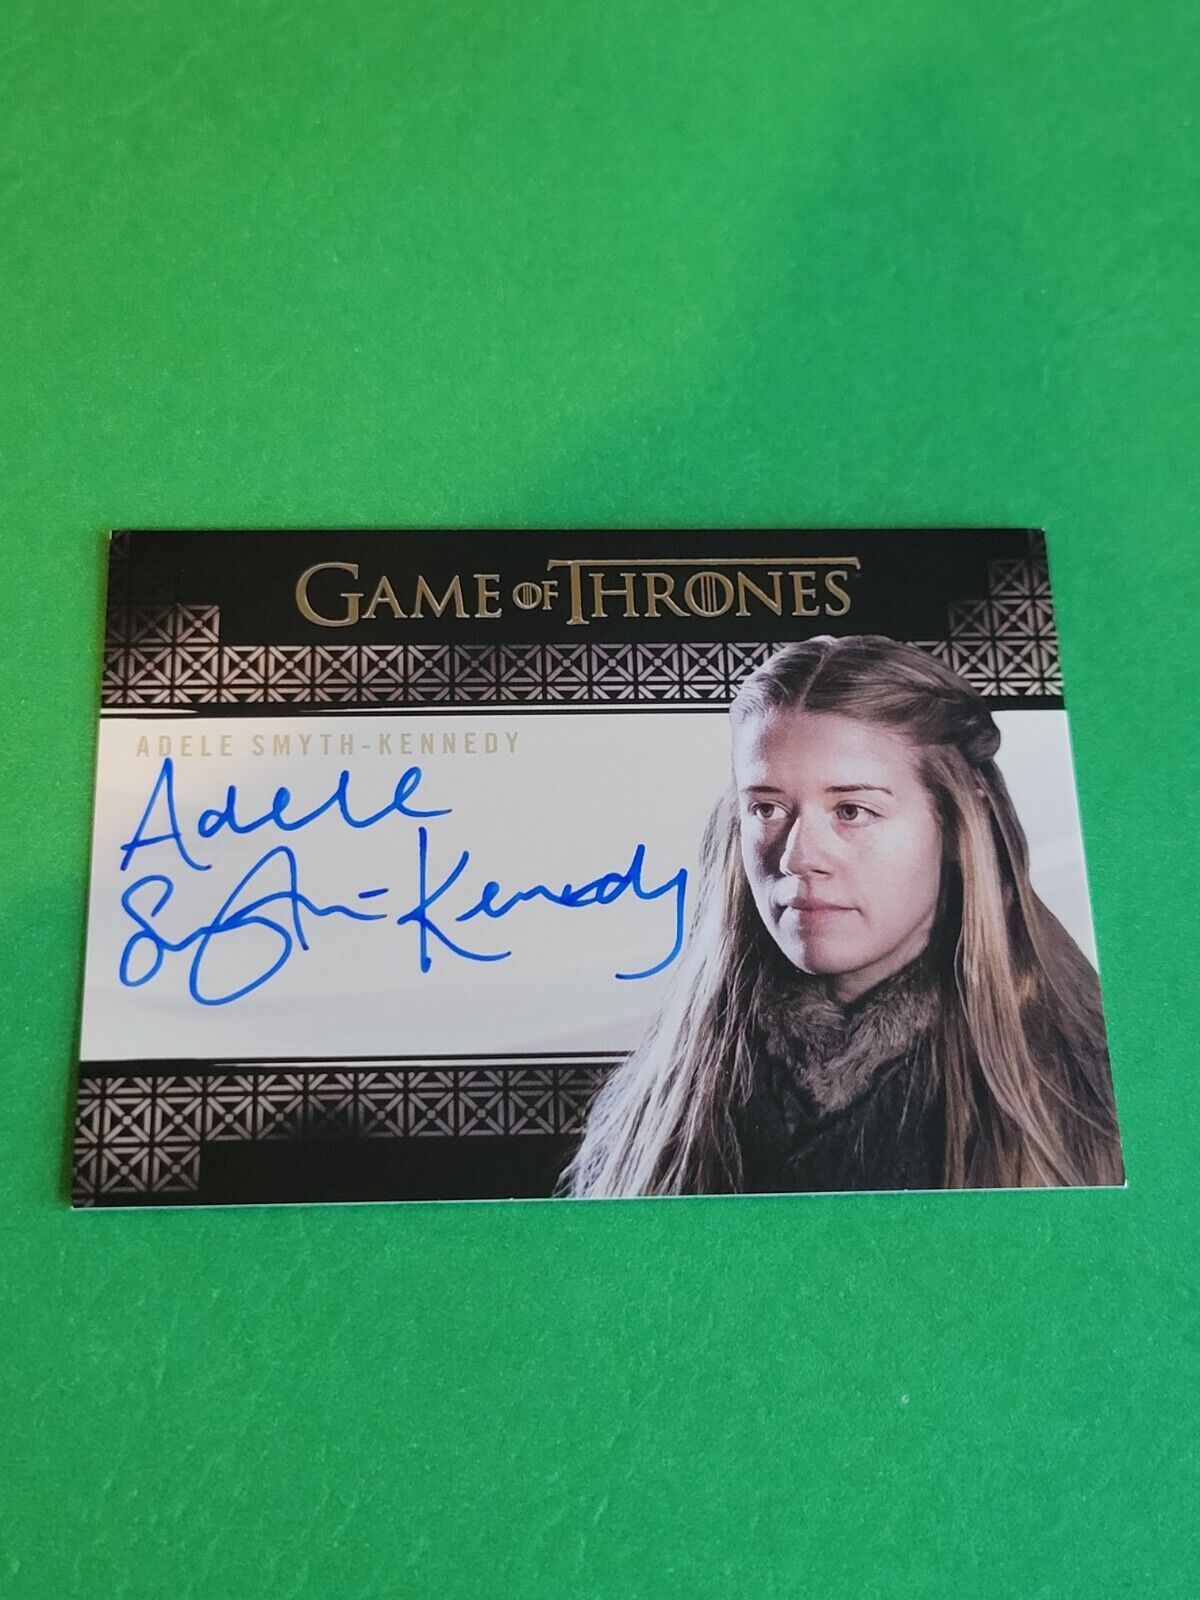 ADELE SMYTH-KENNEDY - 2020 GAME OF THRONES COMPLETE SERIES AUTOGRAPH